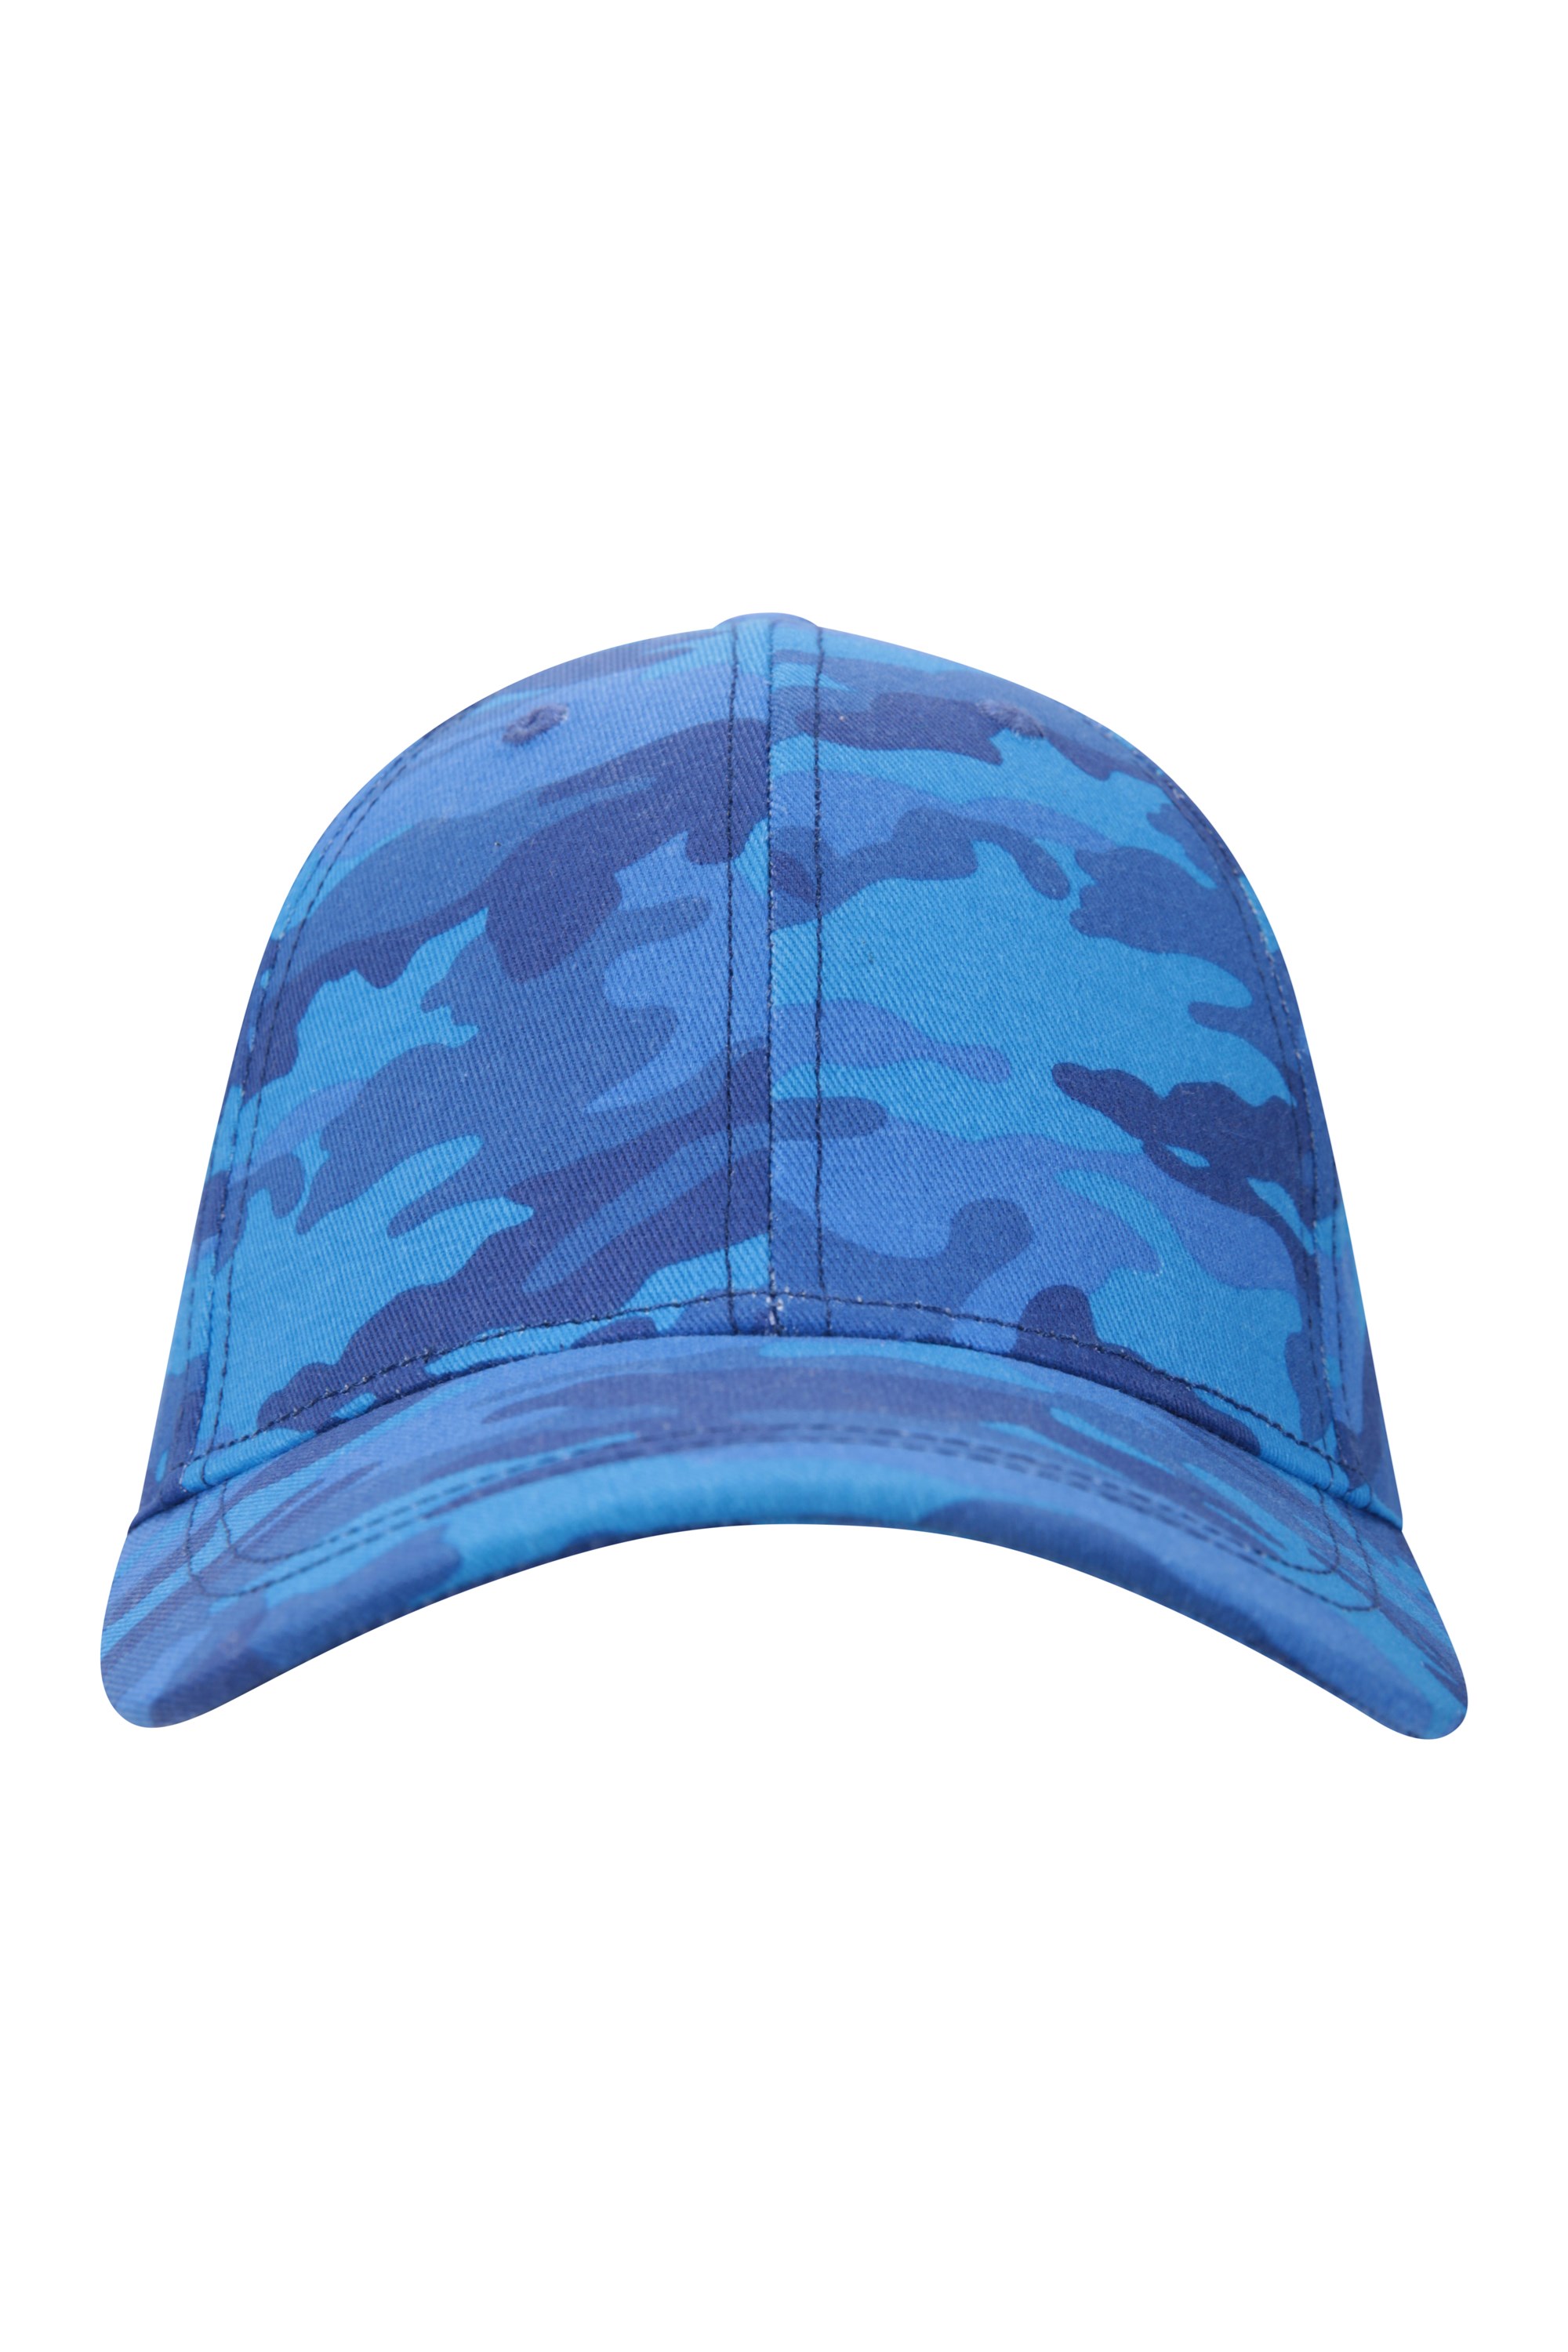 Mountain Warehouse Glare Boys Baseball Cap Blue with Hoop and Loop Strap-One 